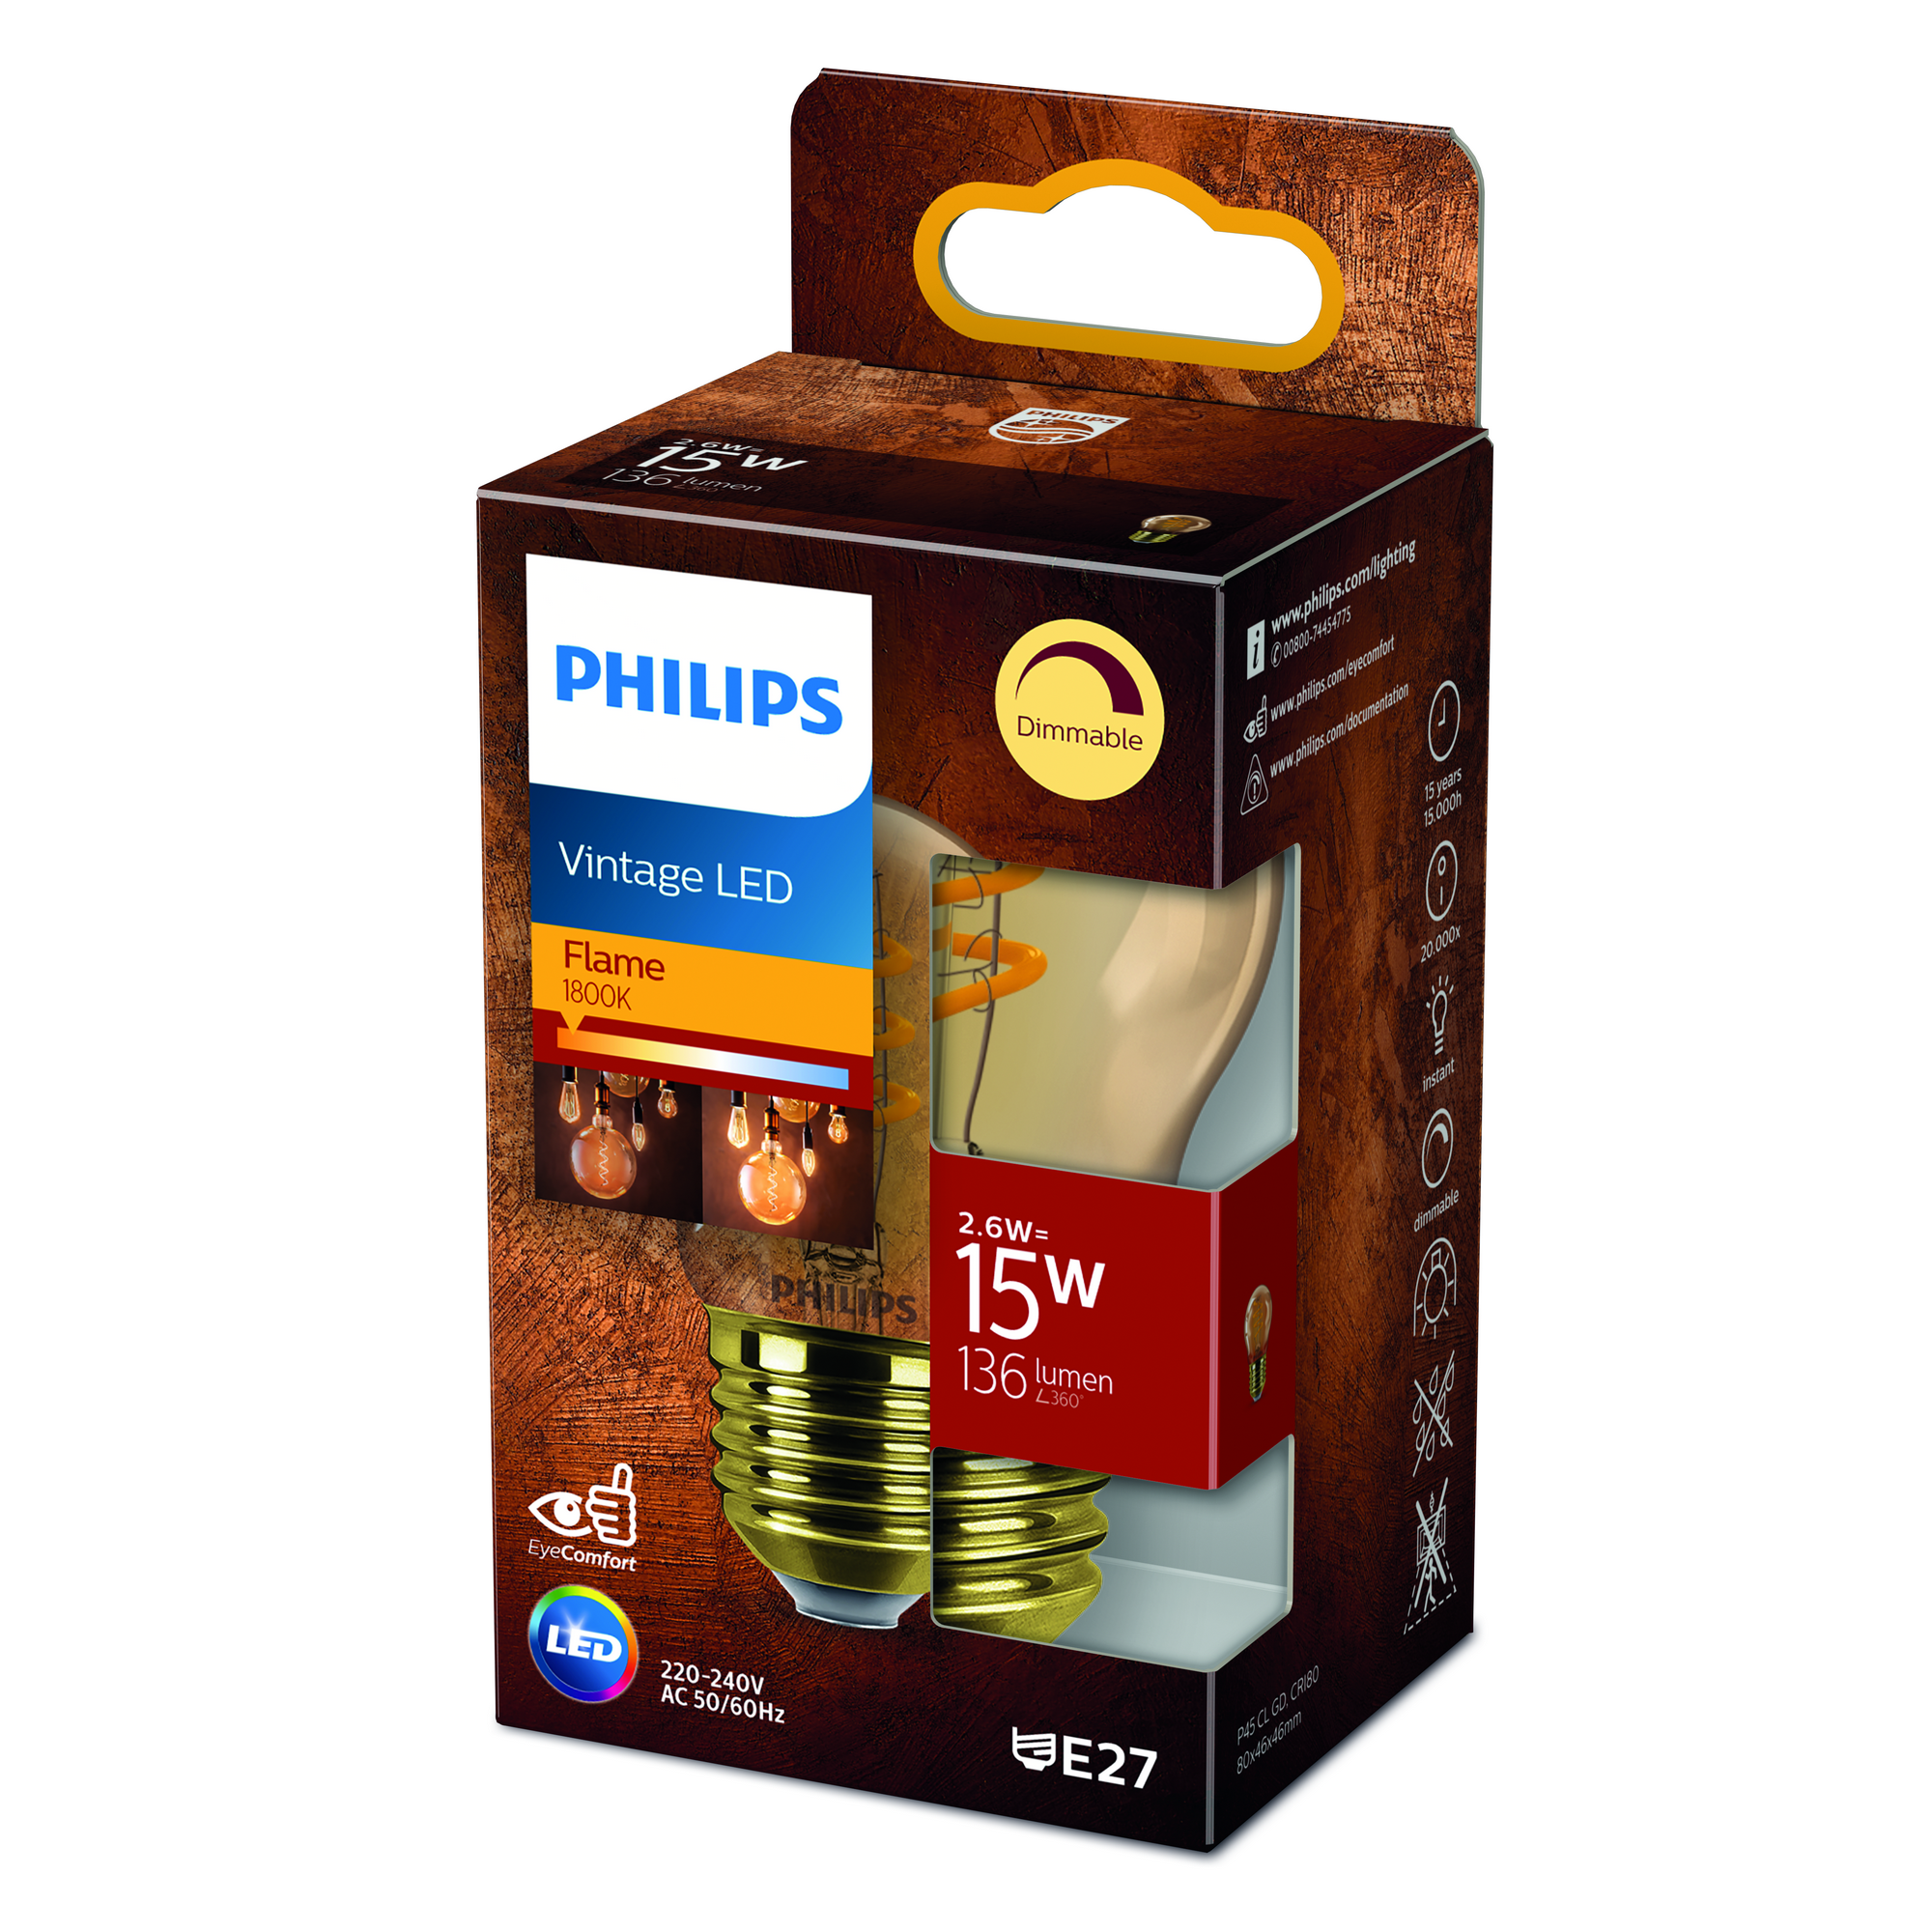 LED-Tropfenlampe 'Vintage' Gold E27 3,5 W, dimmbar + product picture